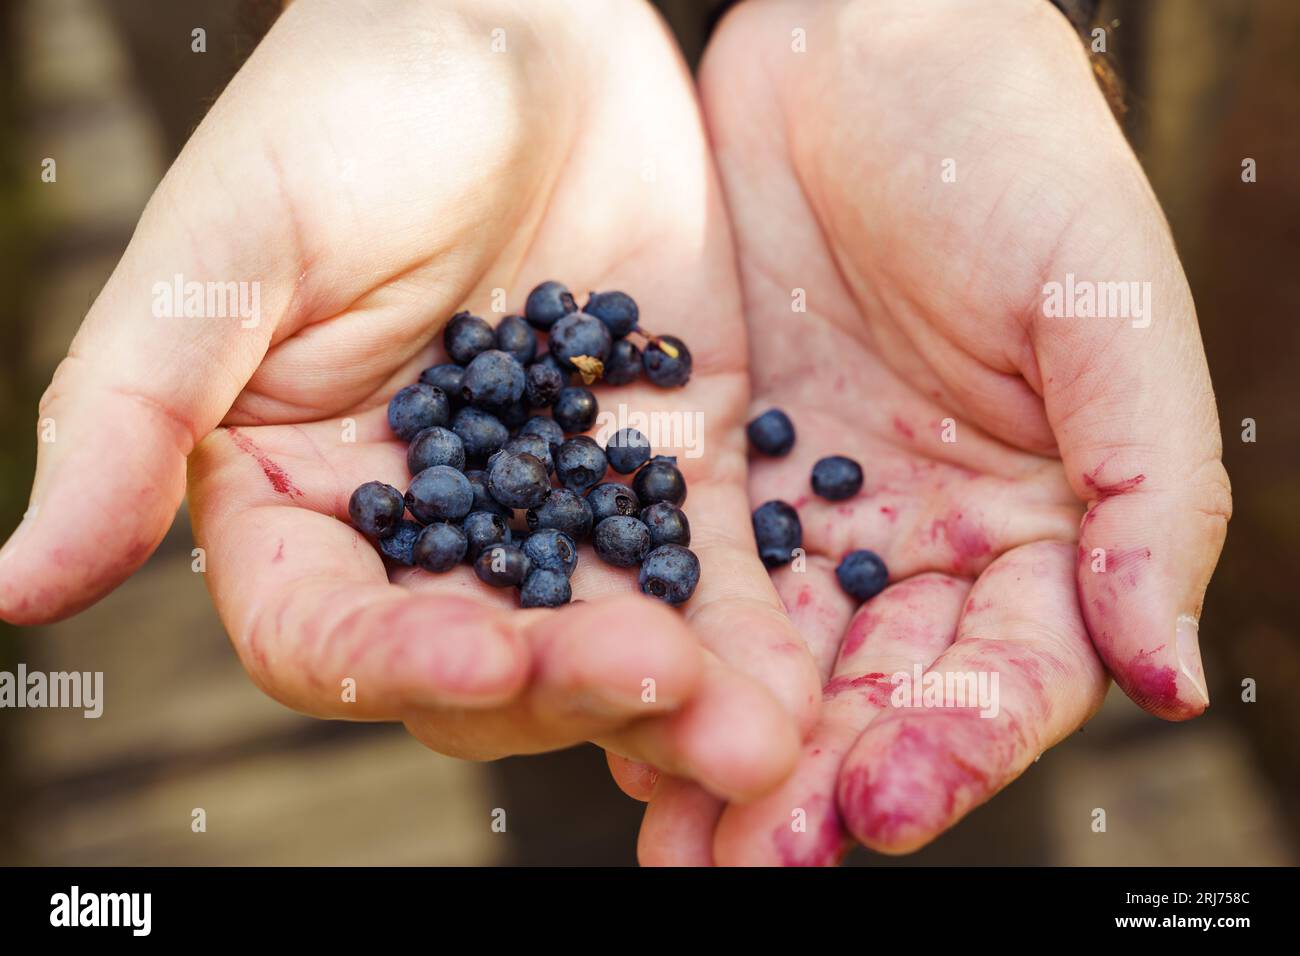 Men's hands, smeared with blueberry juice in purple color, hold a handful of fresh forest blueberries Stock Photo